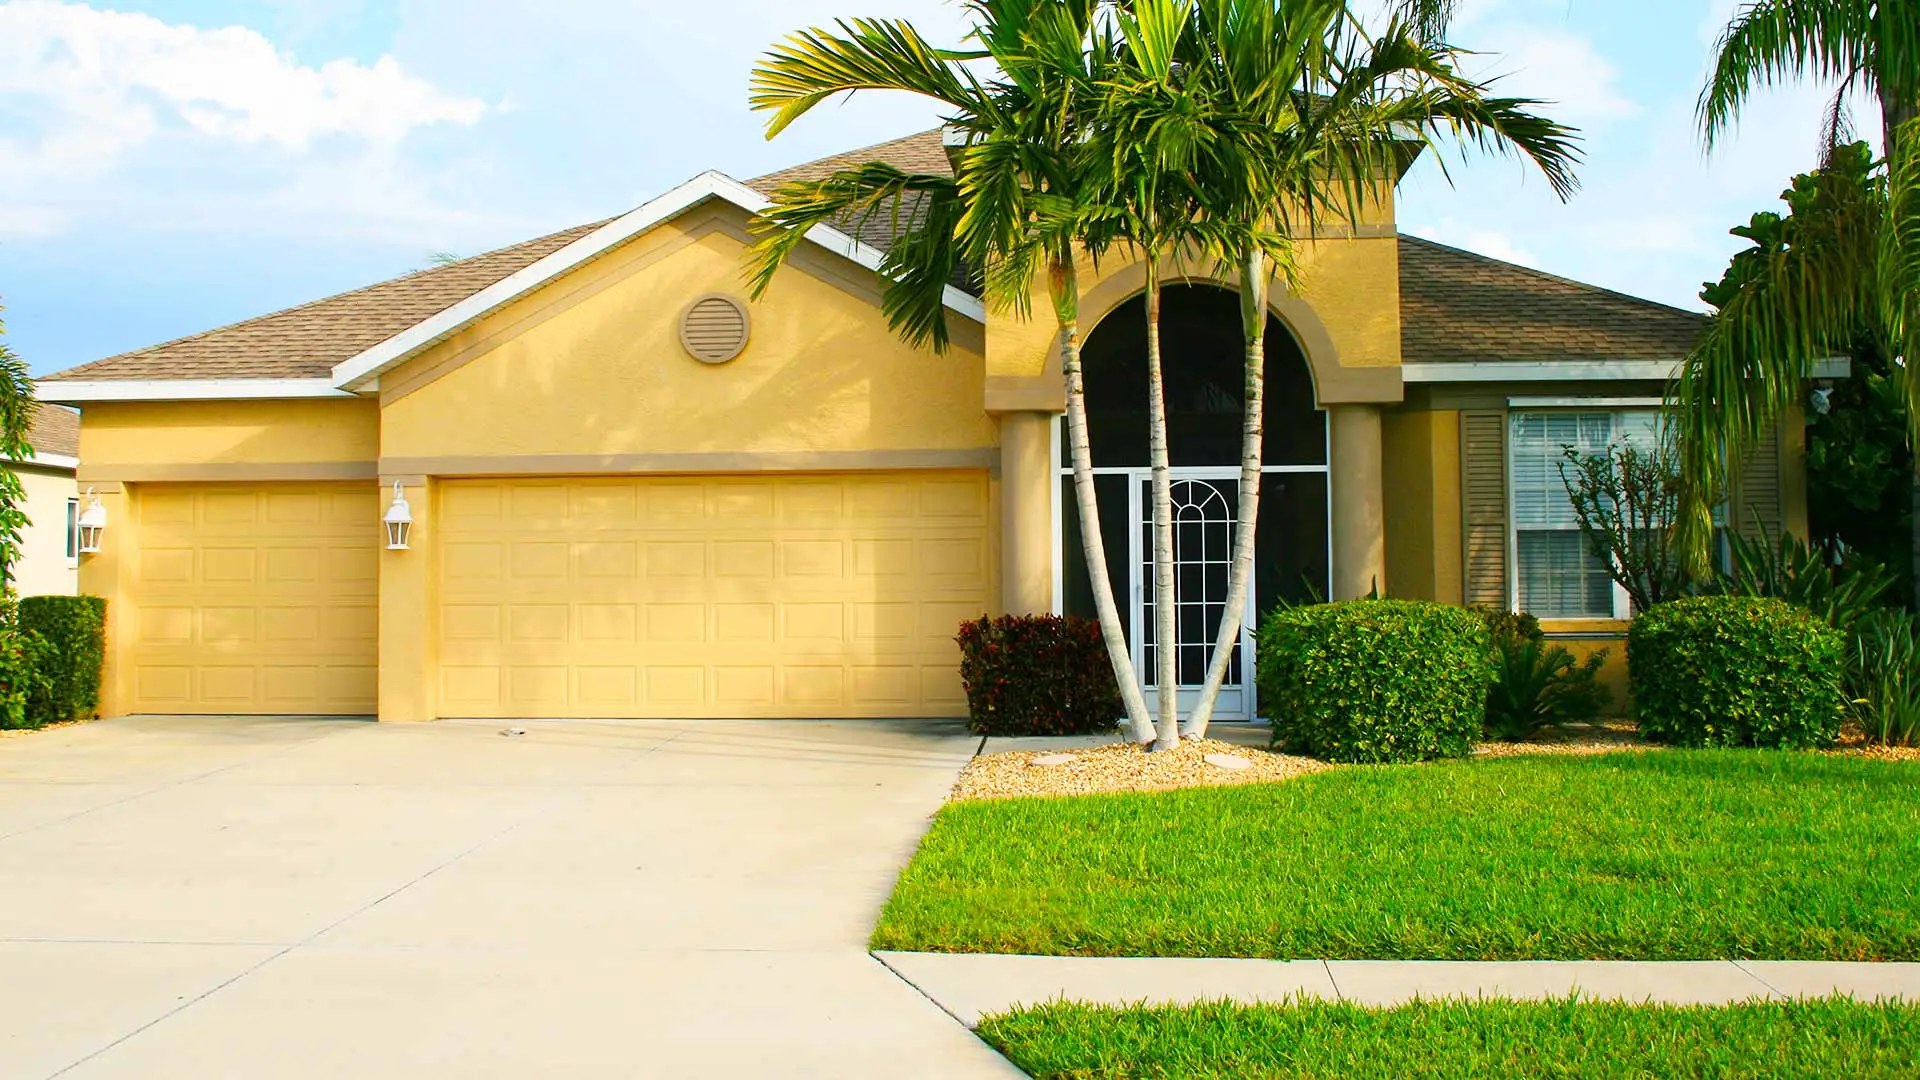 Lakeland, FL home with professionally manicured landscape by ProCare Lawn Maintenance.